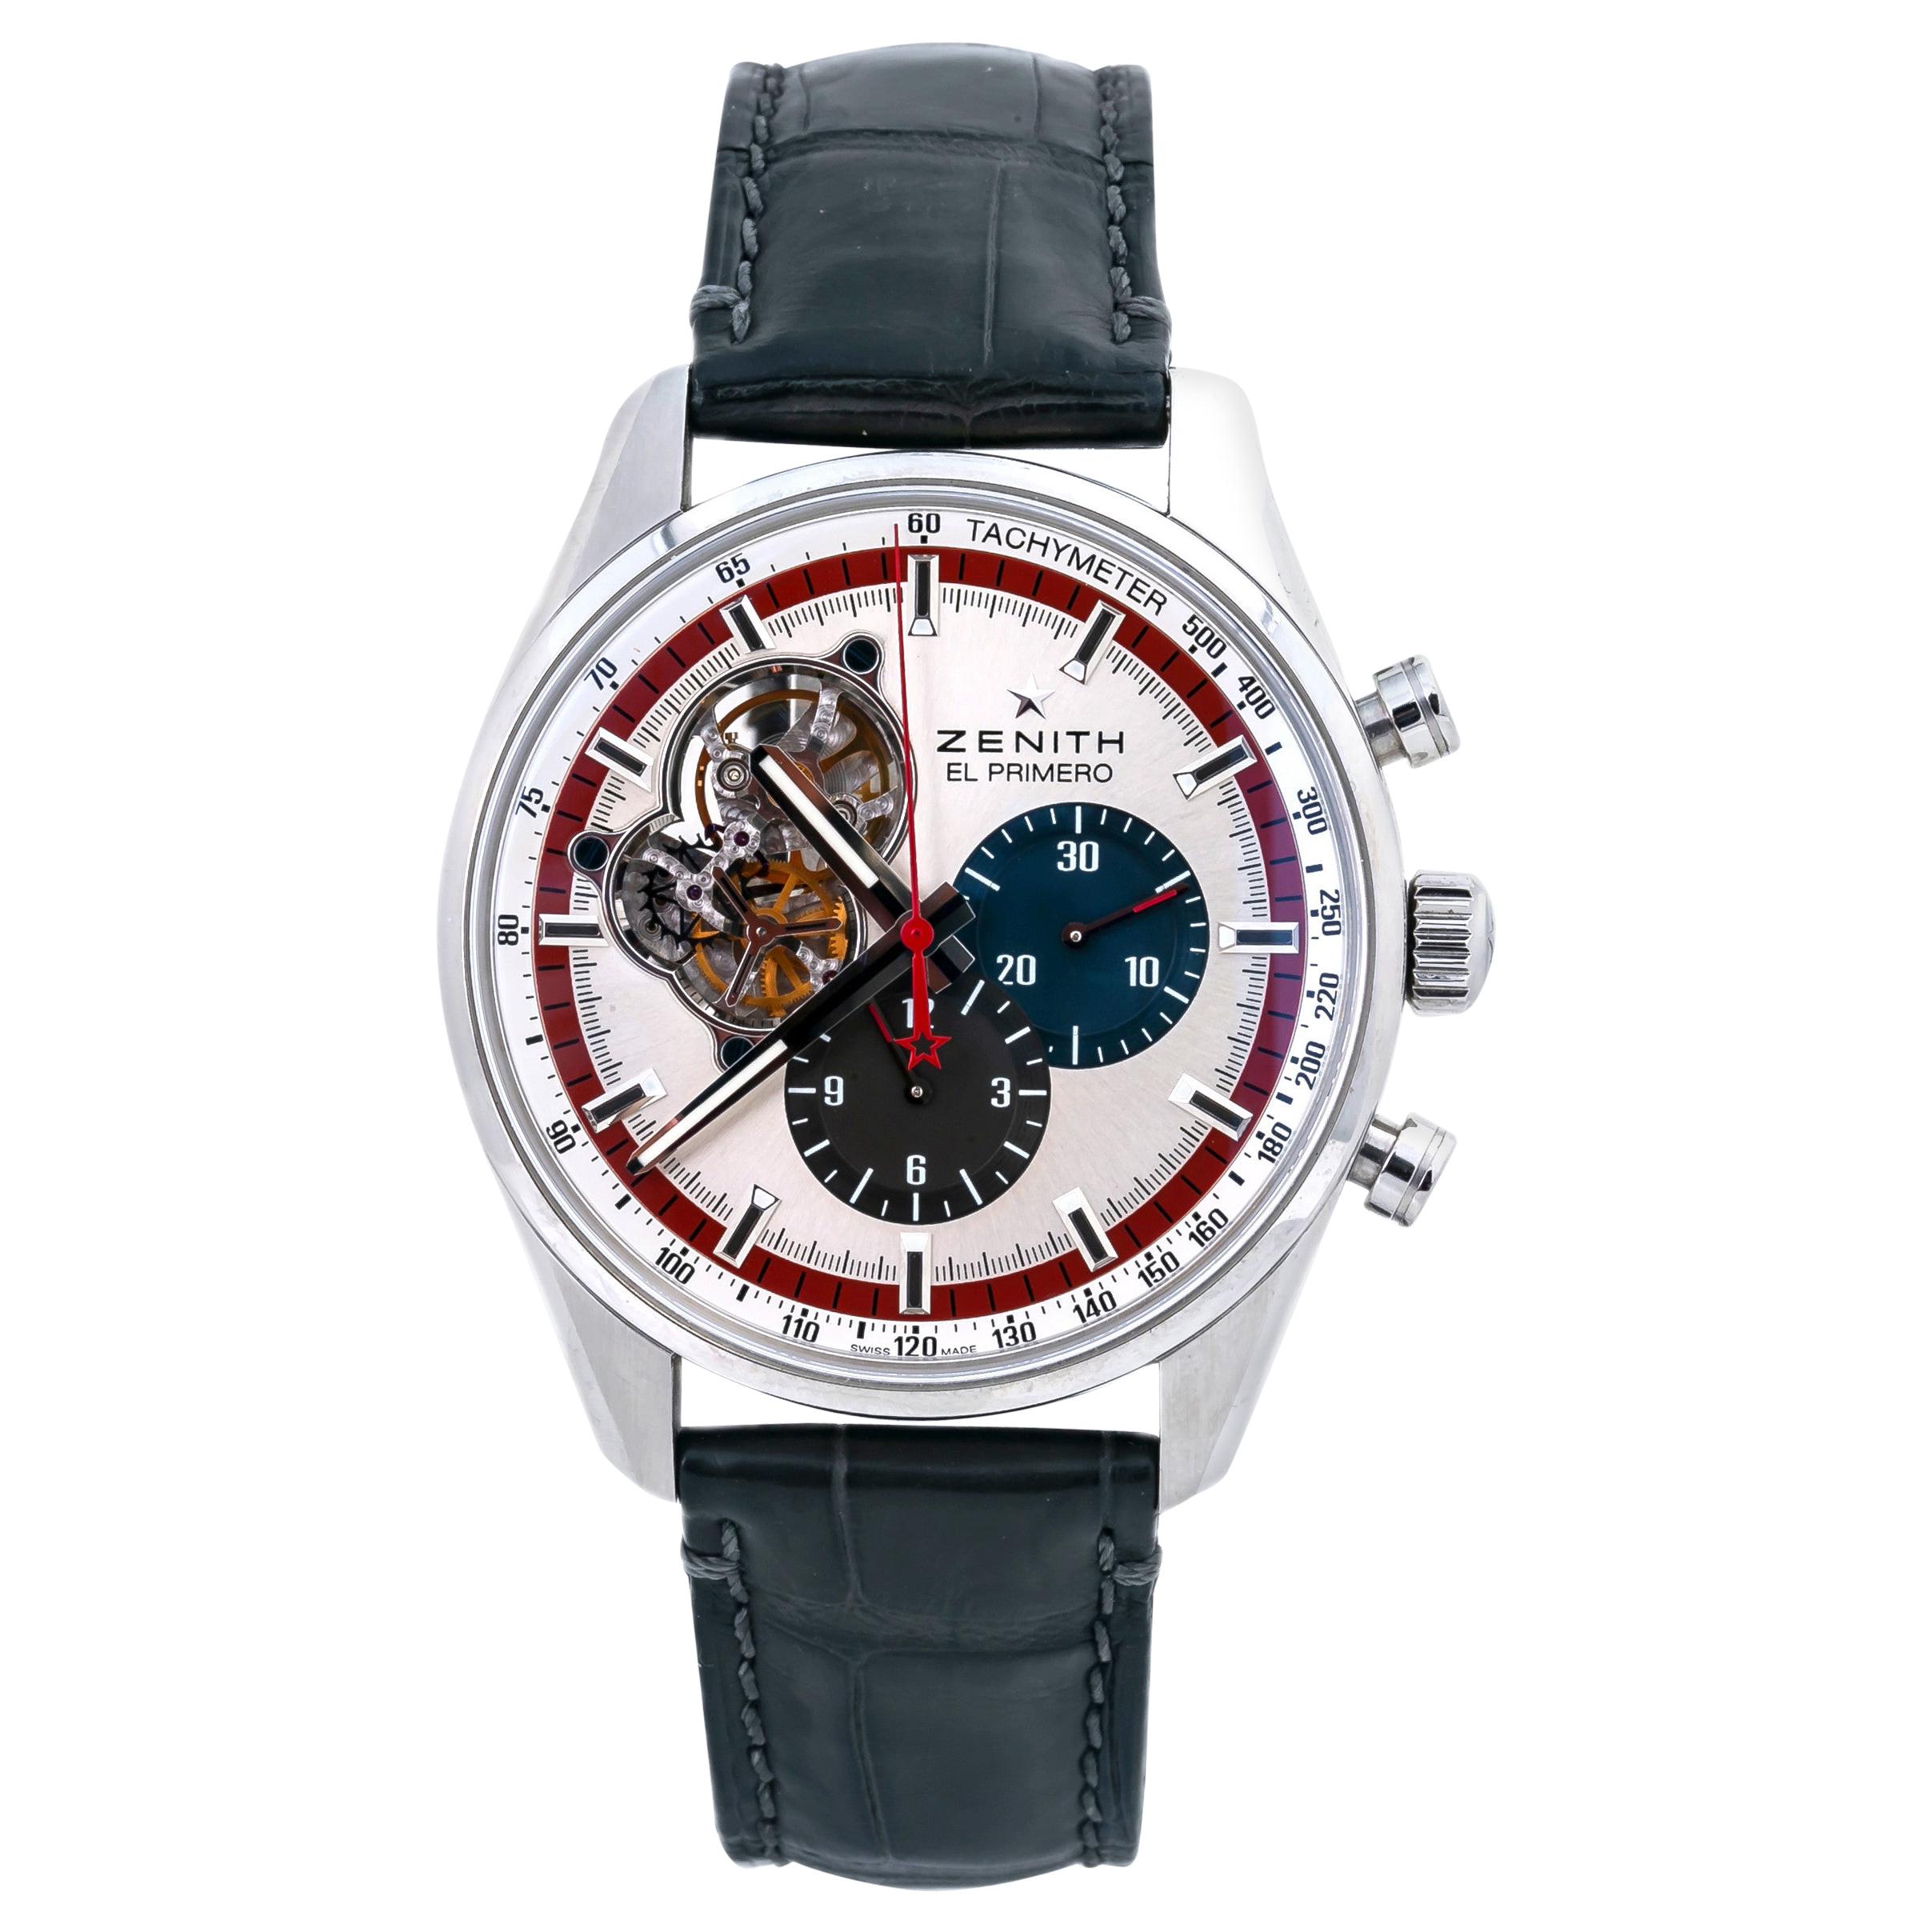 Zenith El Primero 03.2049.4061 Open Chronomaster with Box and Paper For Sale